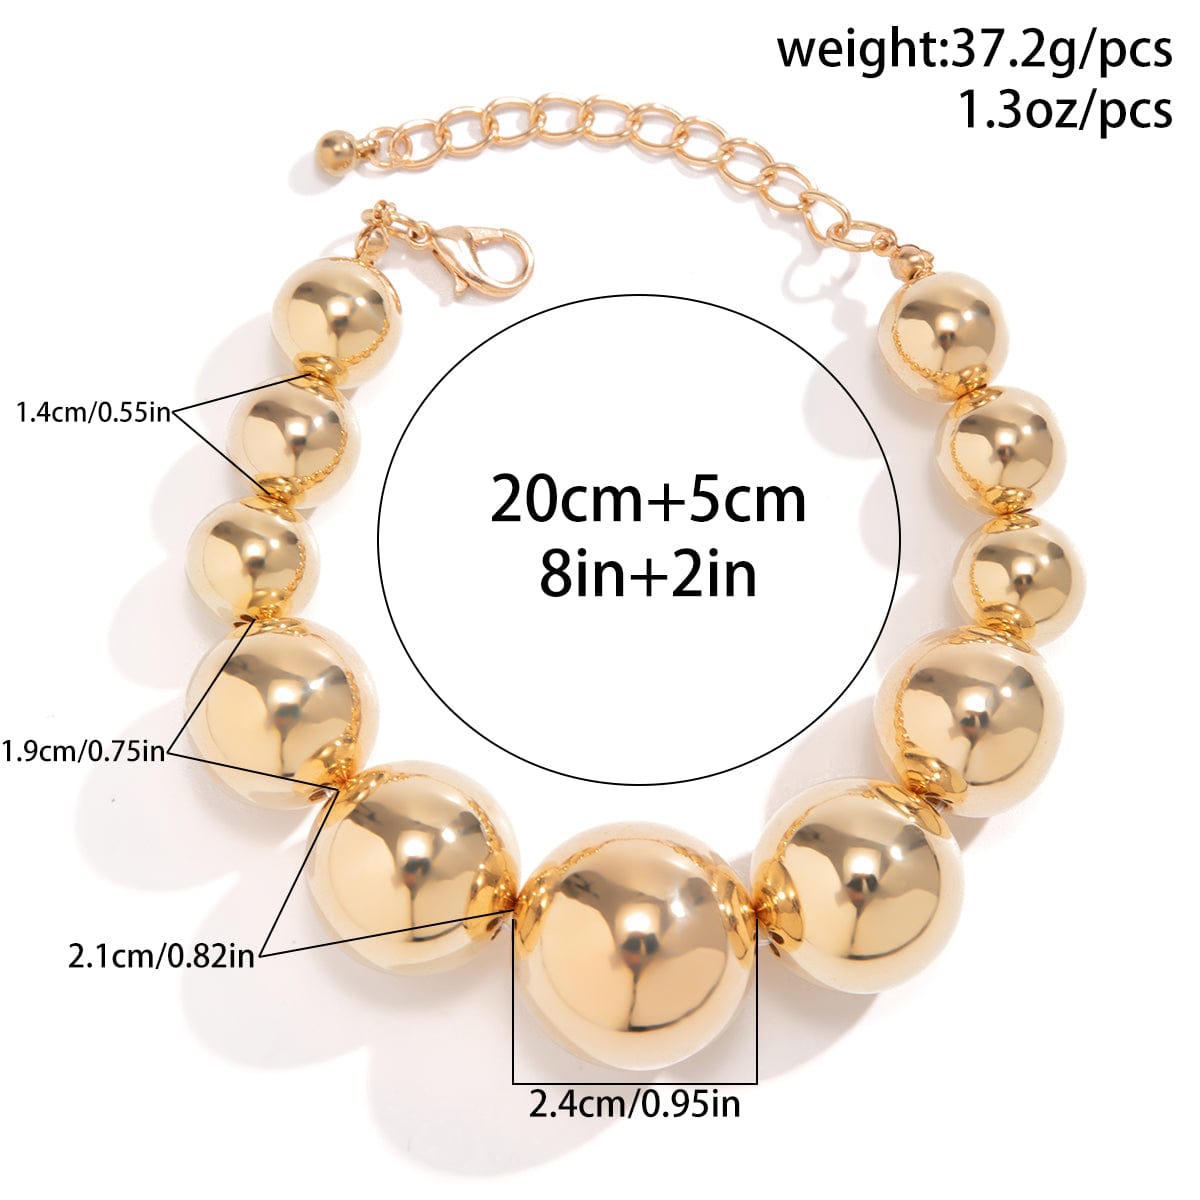 Ellani Stainless Steel Ball Bracelet with ... @ $79.00